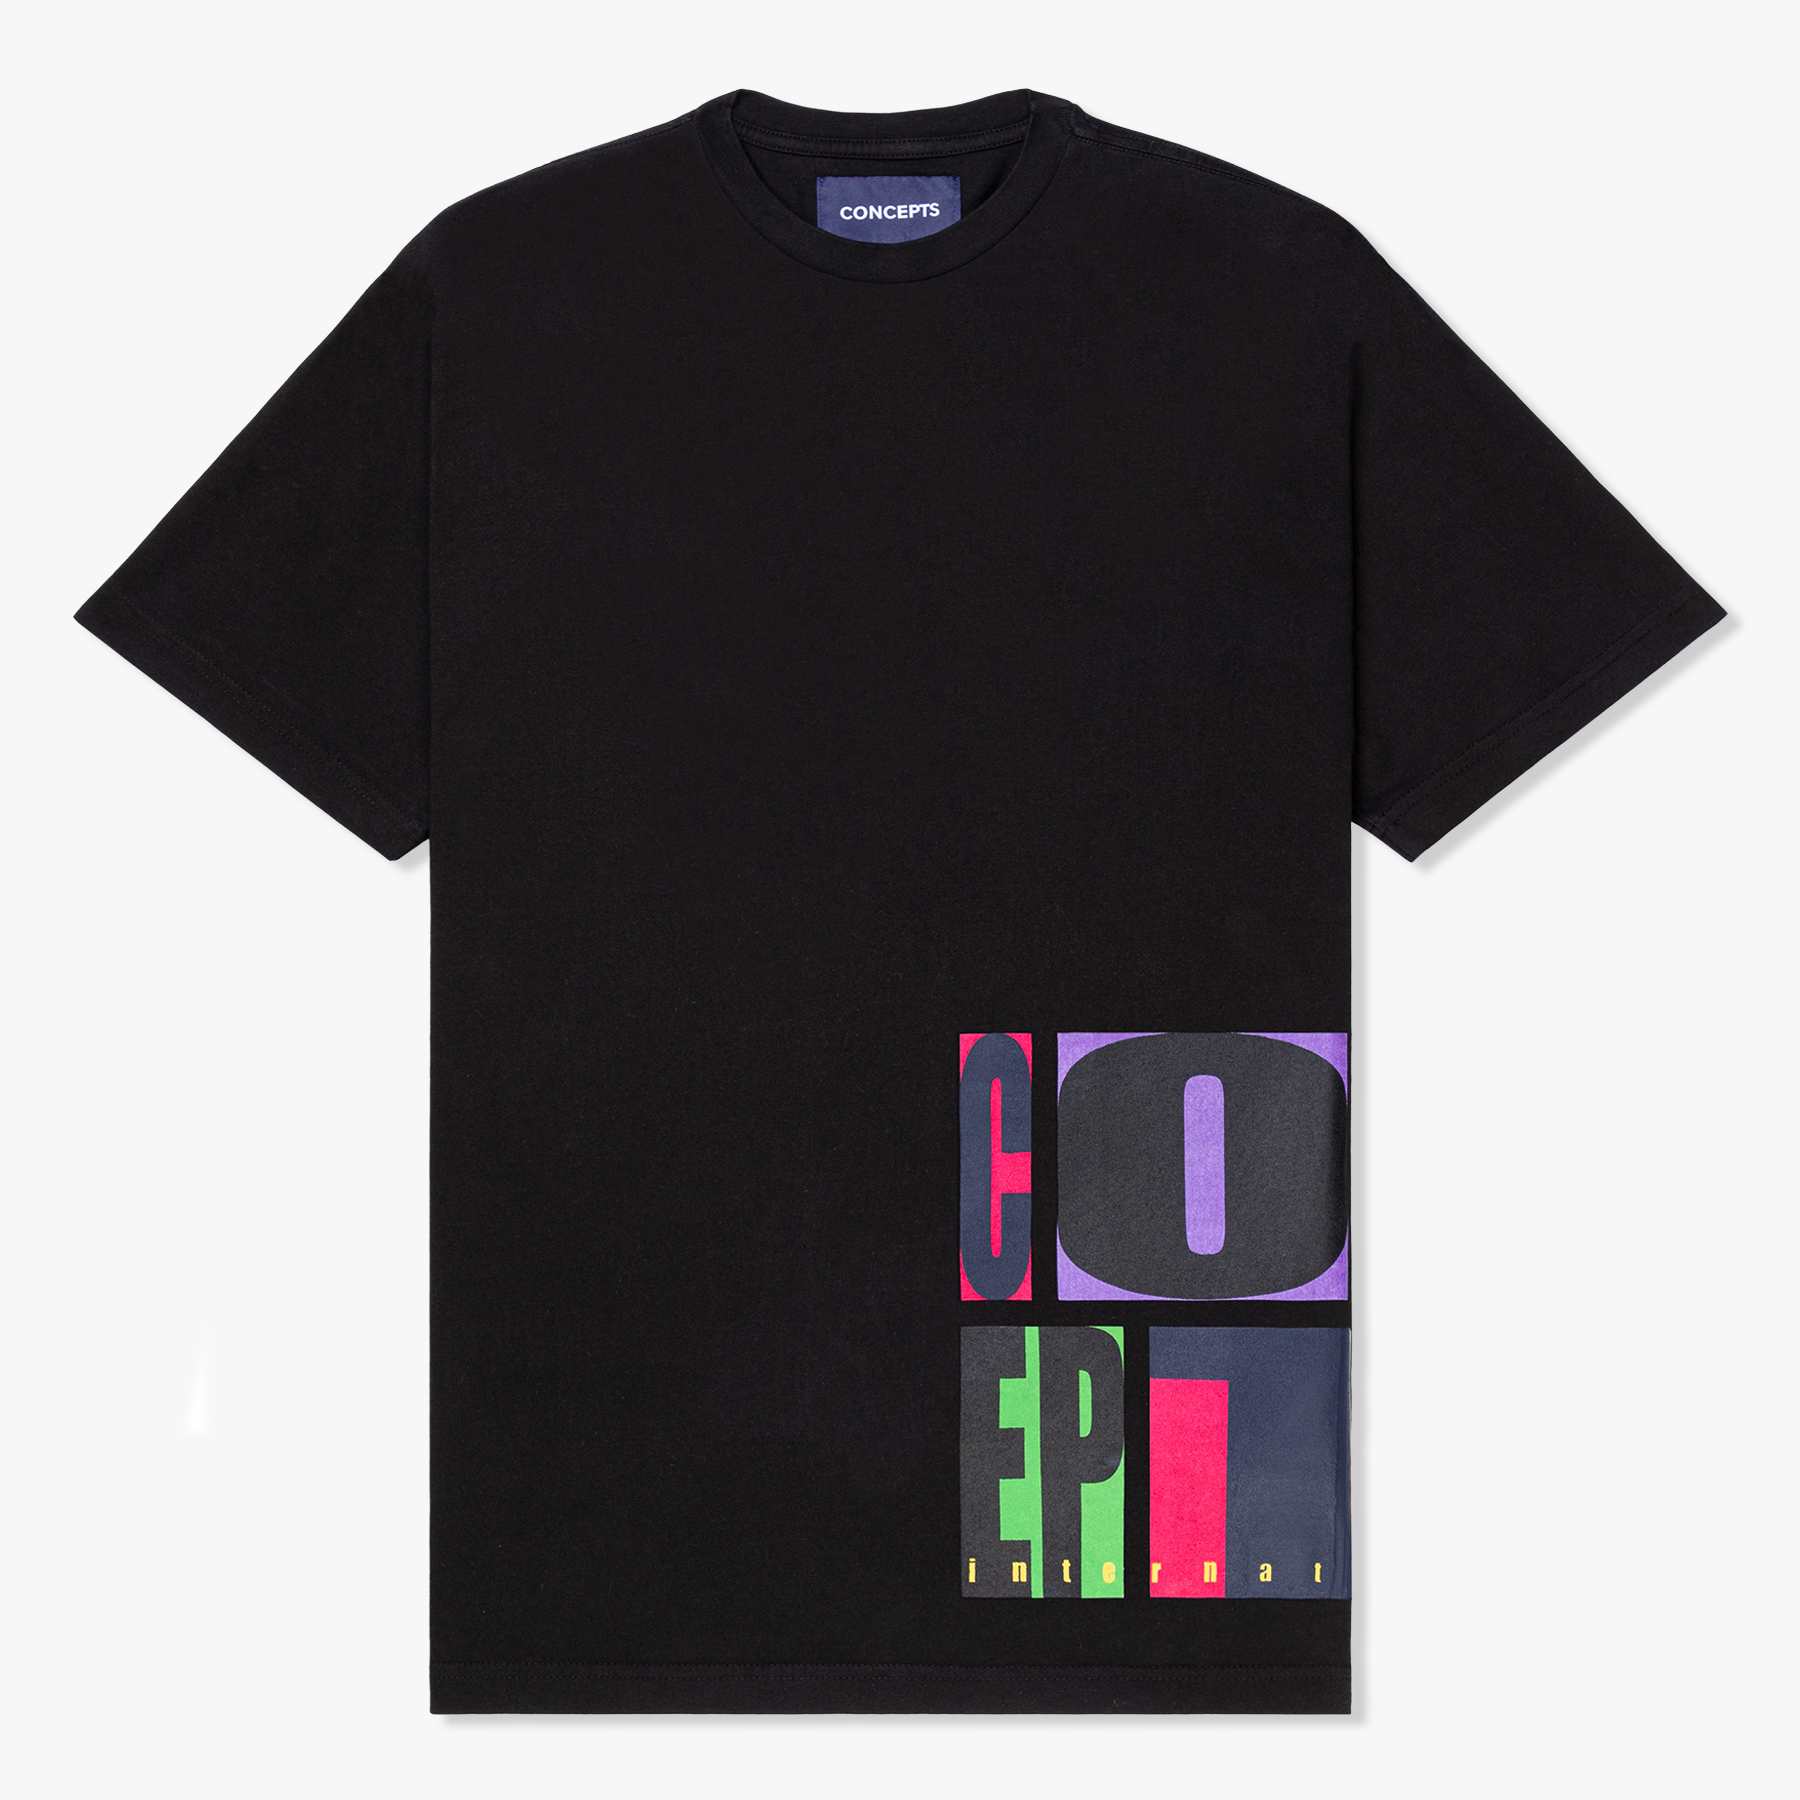 Concepts_LOBSTER Side Block Logo Tee 